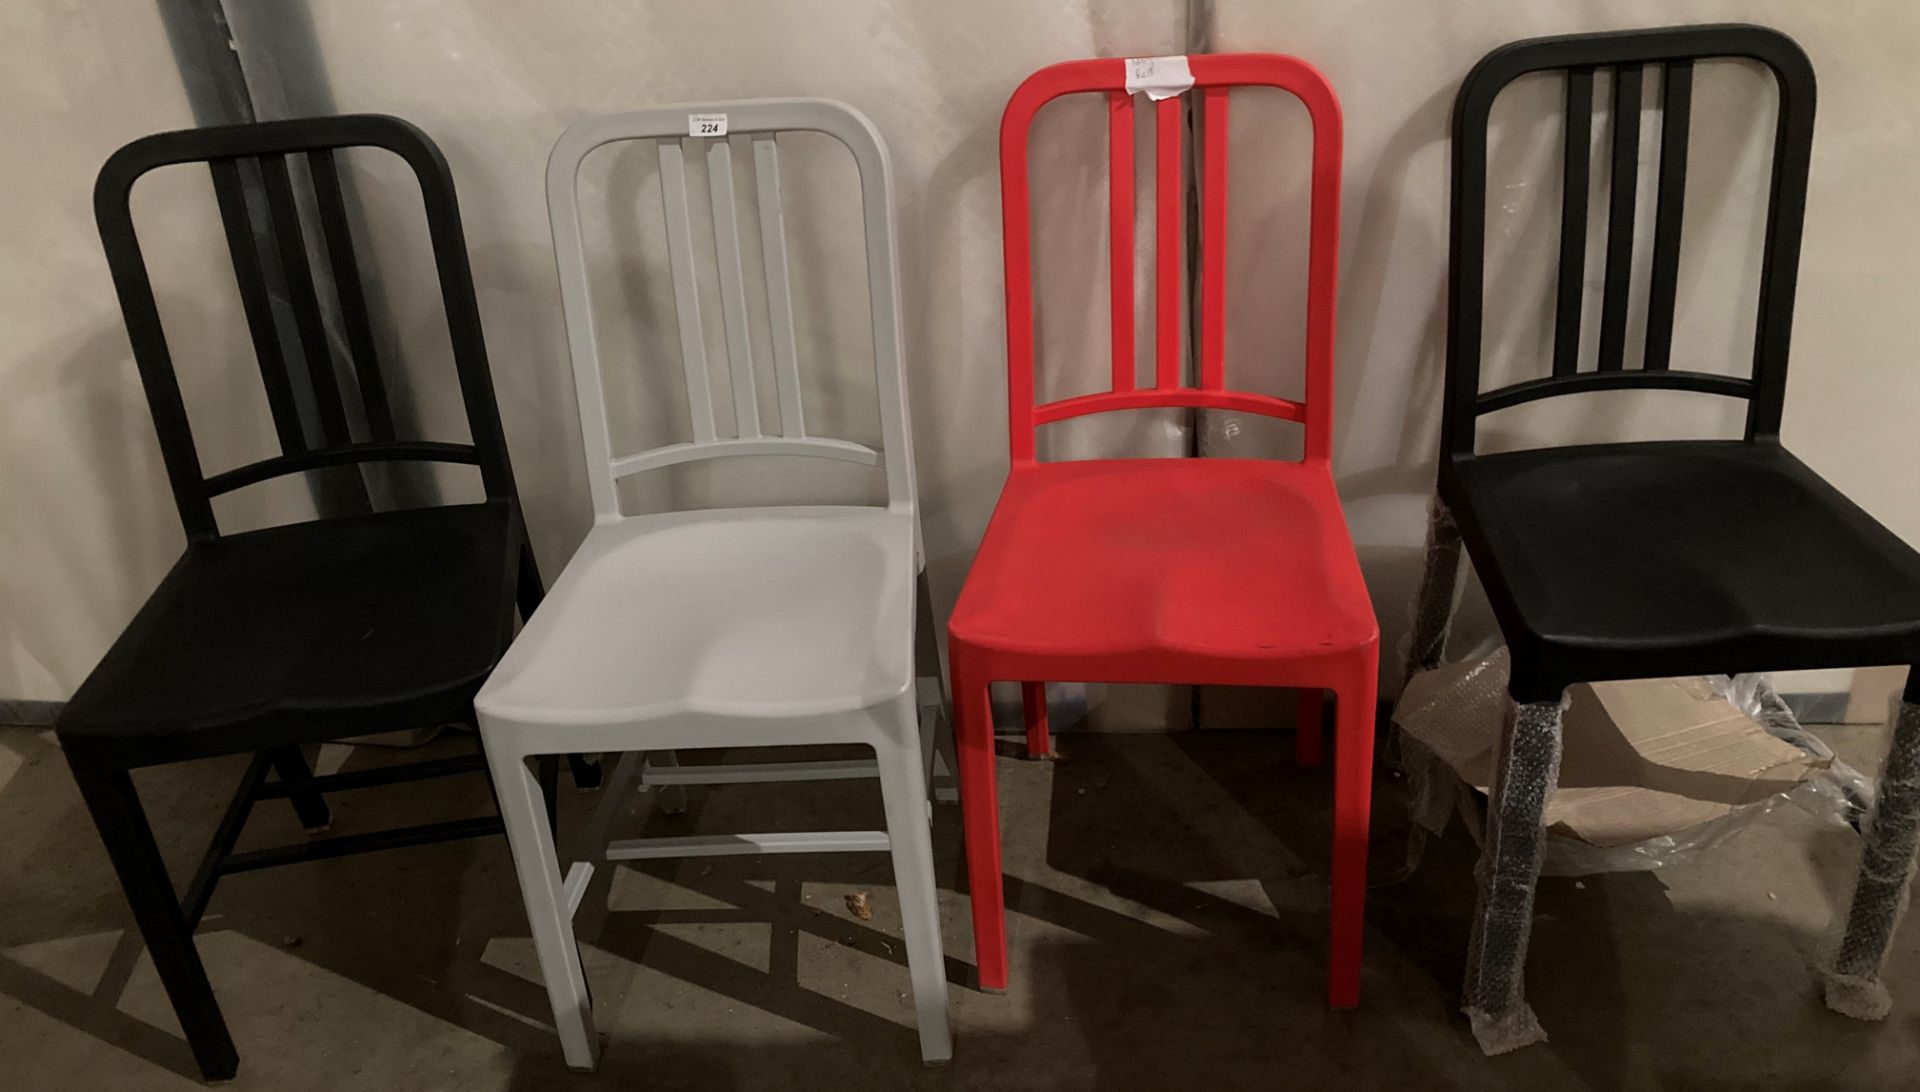 4 x Dining Chairs UK Ltd - PP Navy Plastic Dining Chairs - 2 x Black, 1 x Red,